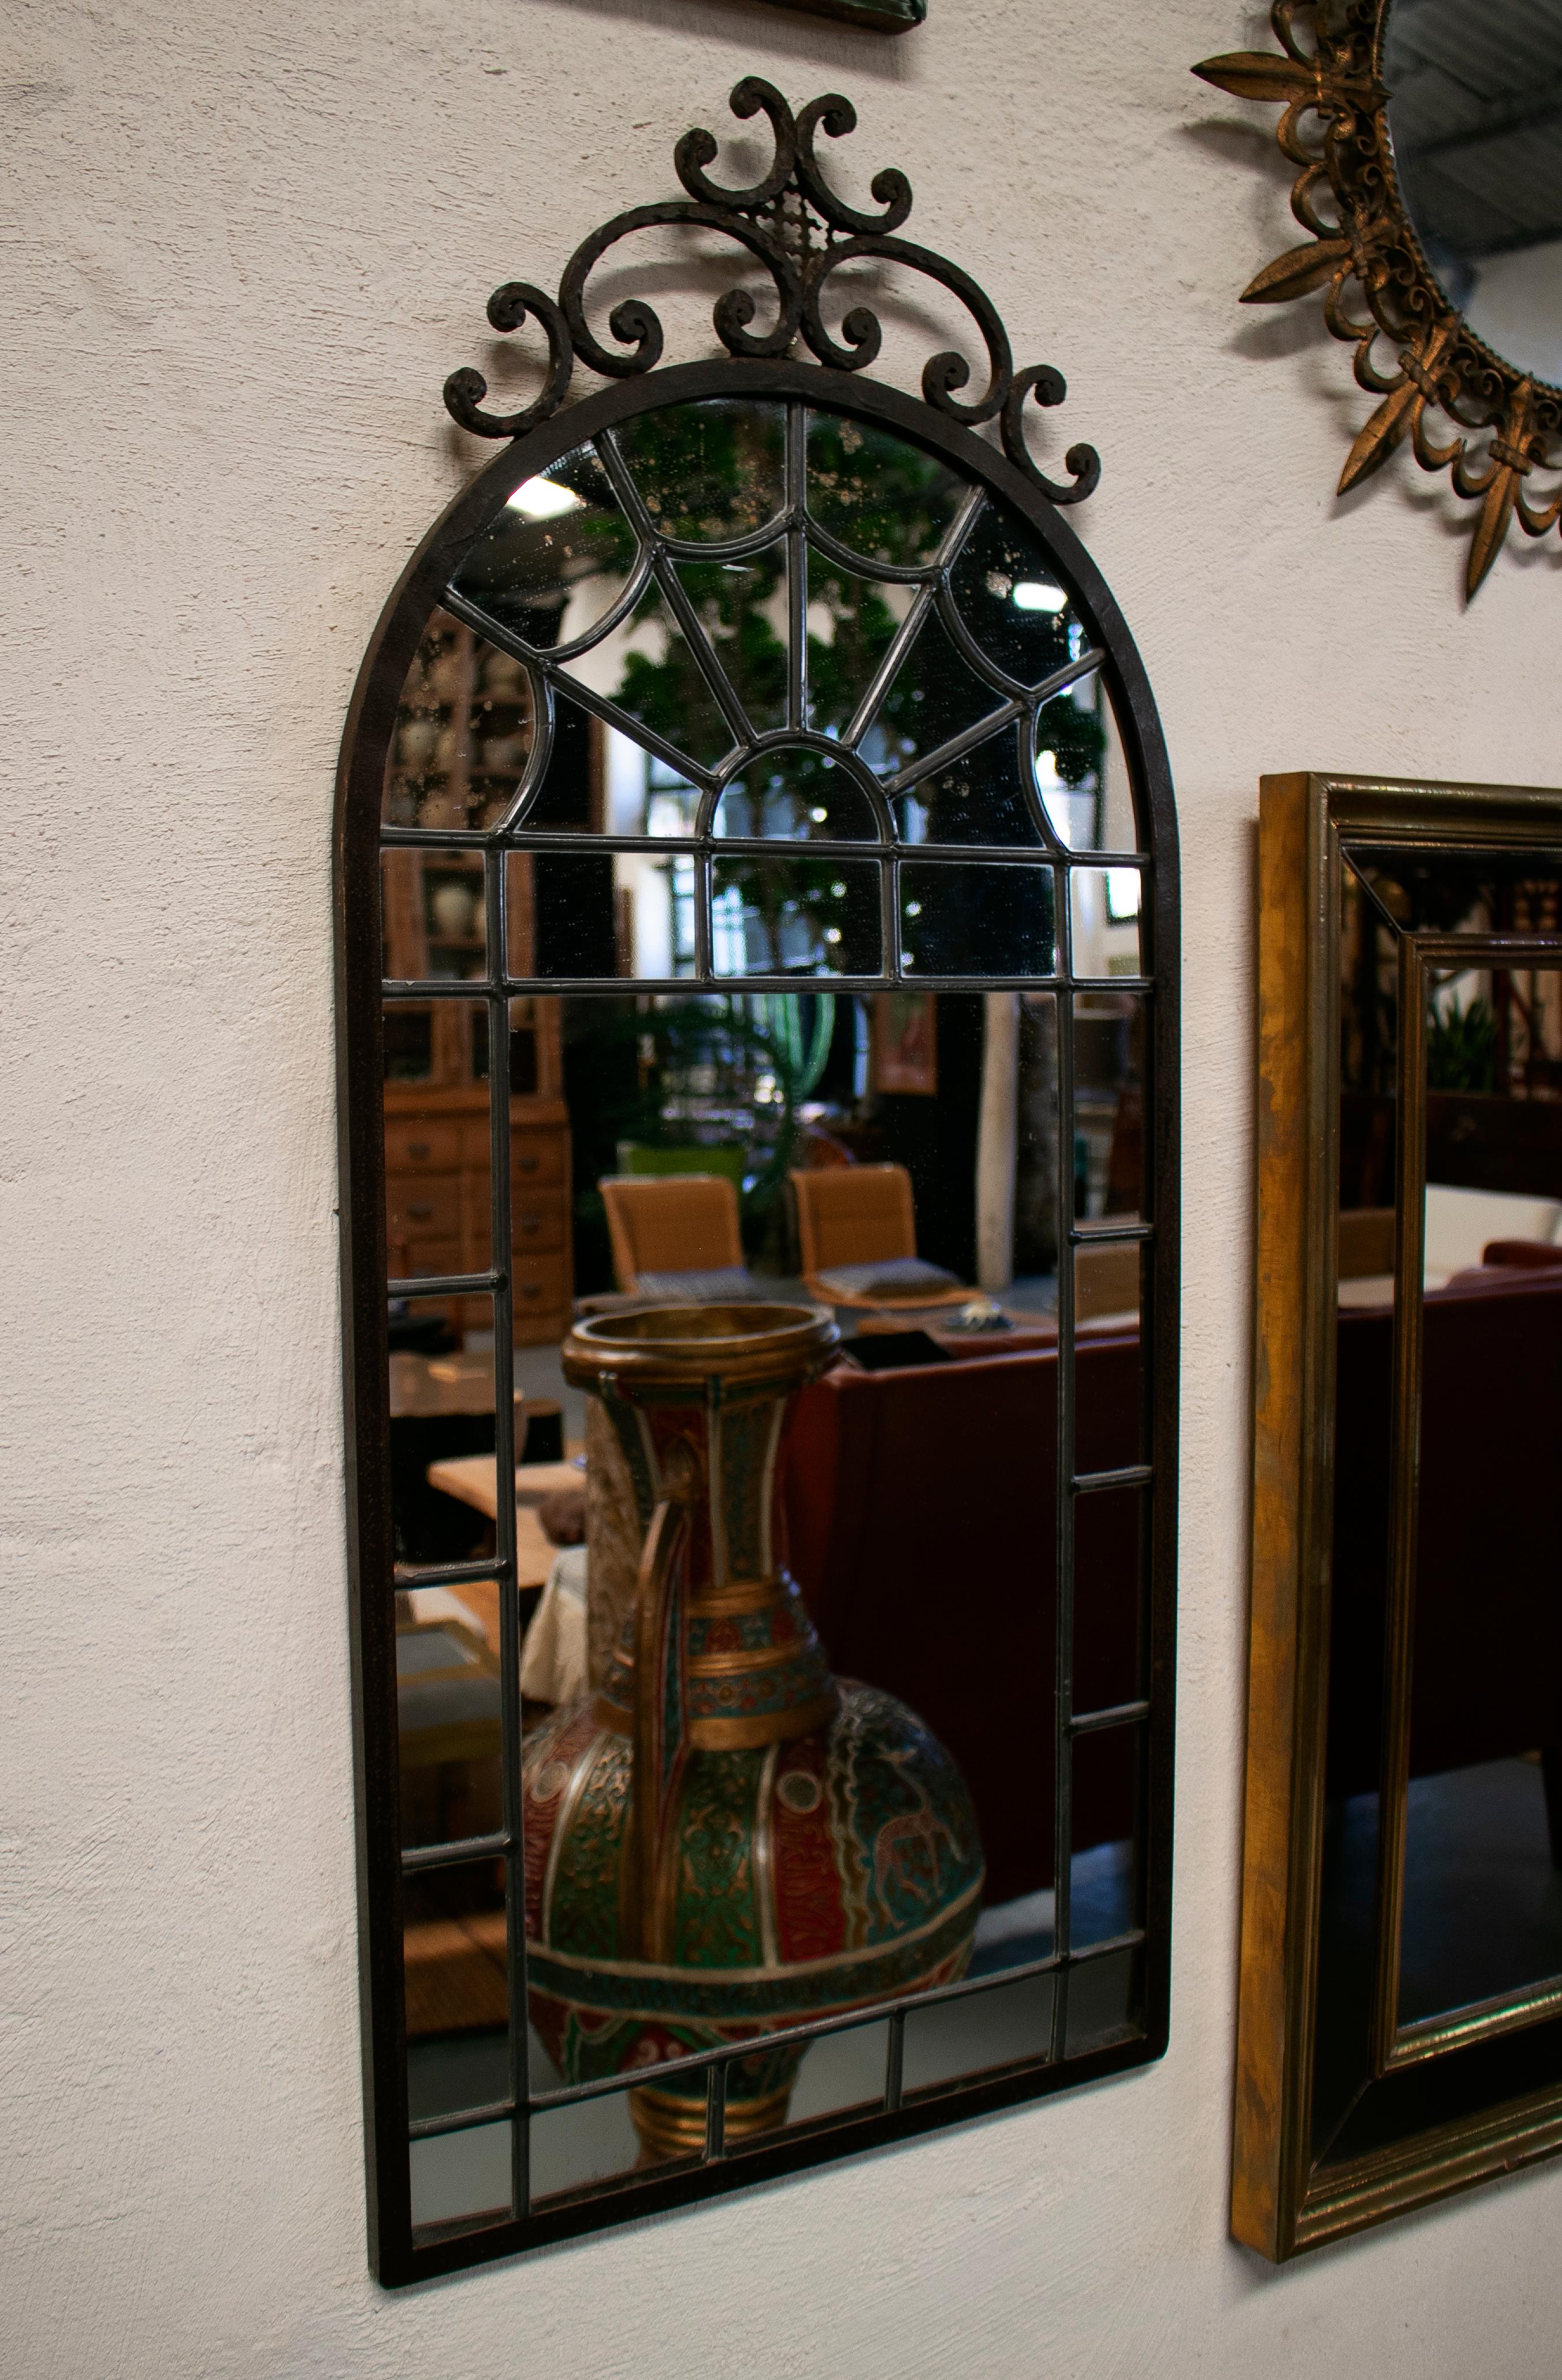 19th century French mirror in an iron frame with small pieces arranged to form patterns and held together with the traditional stained glass technique of using strips of lead.
  